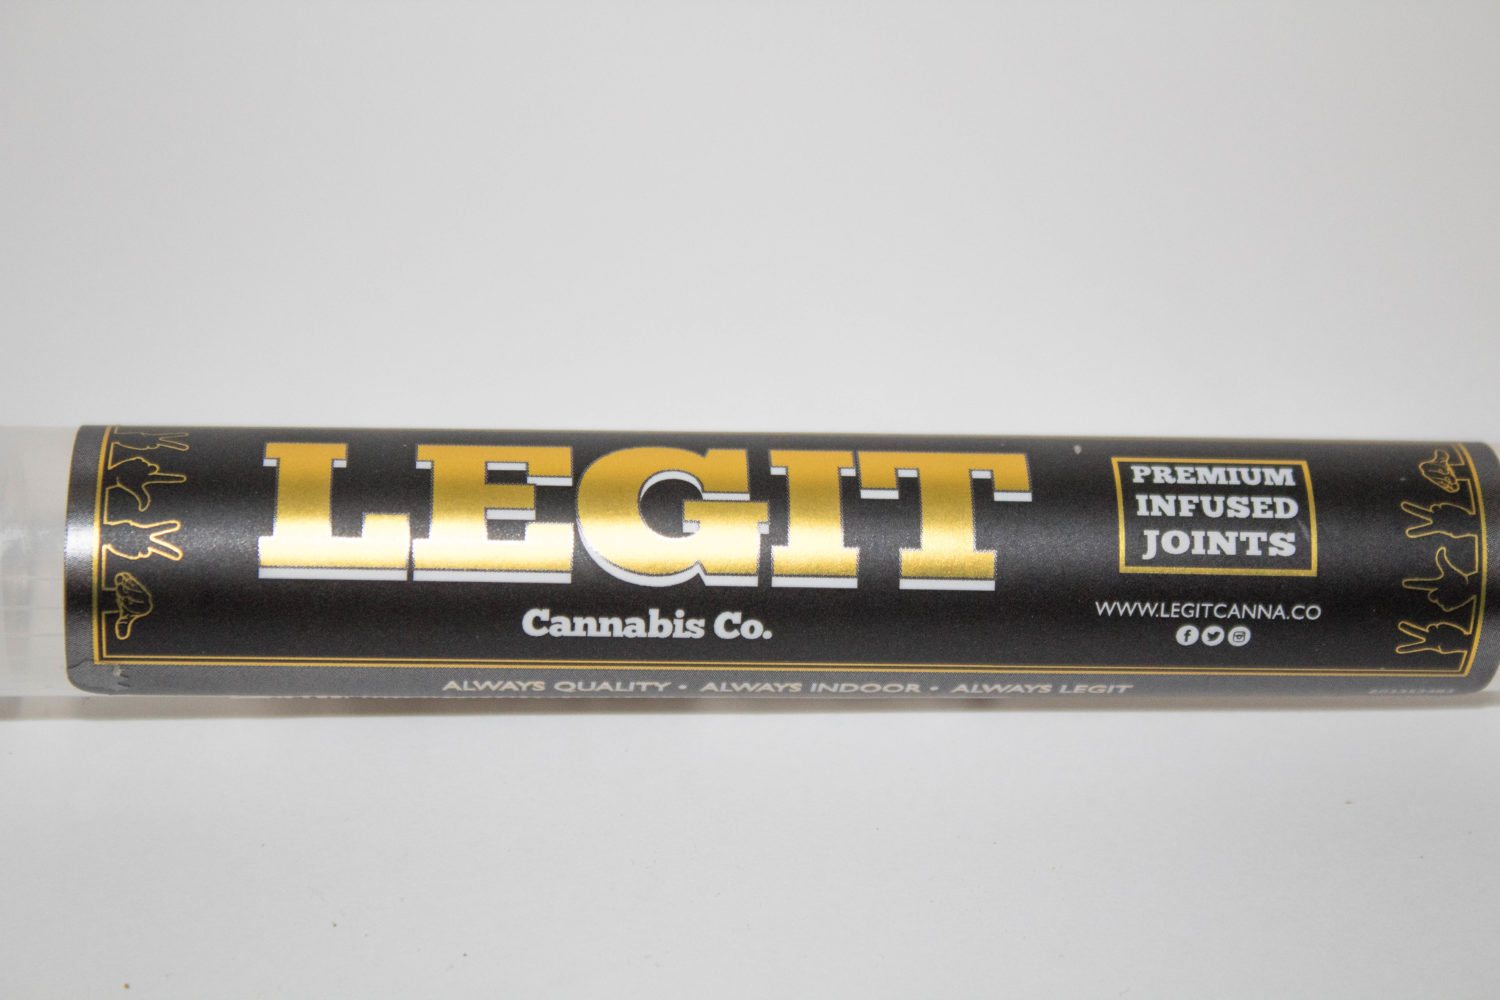 Have You Tried Legit Premium Infused Joints? A Potent Little Package